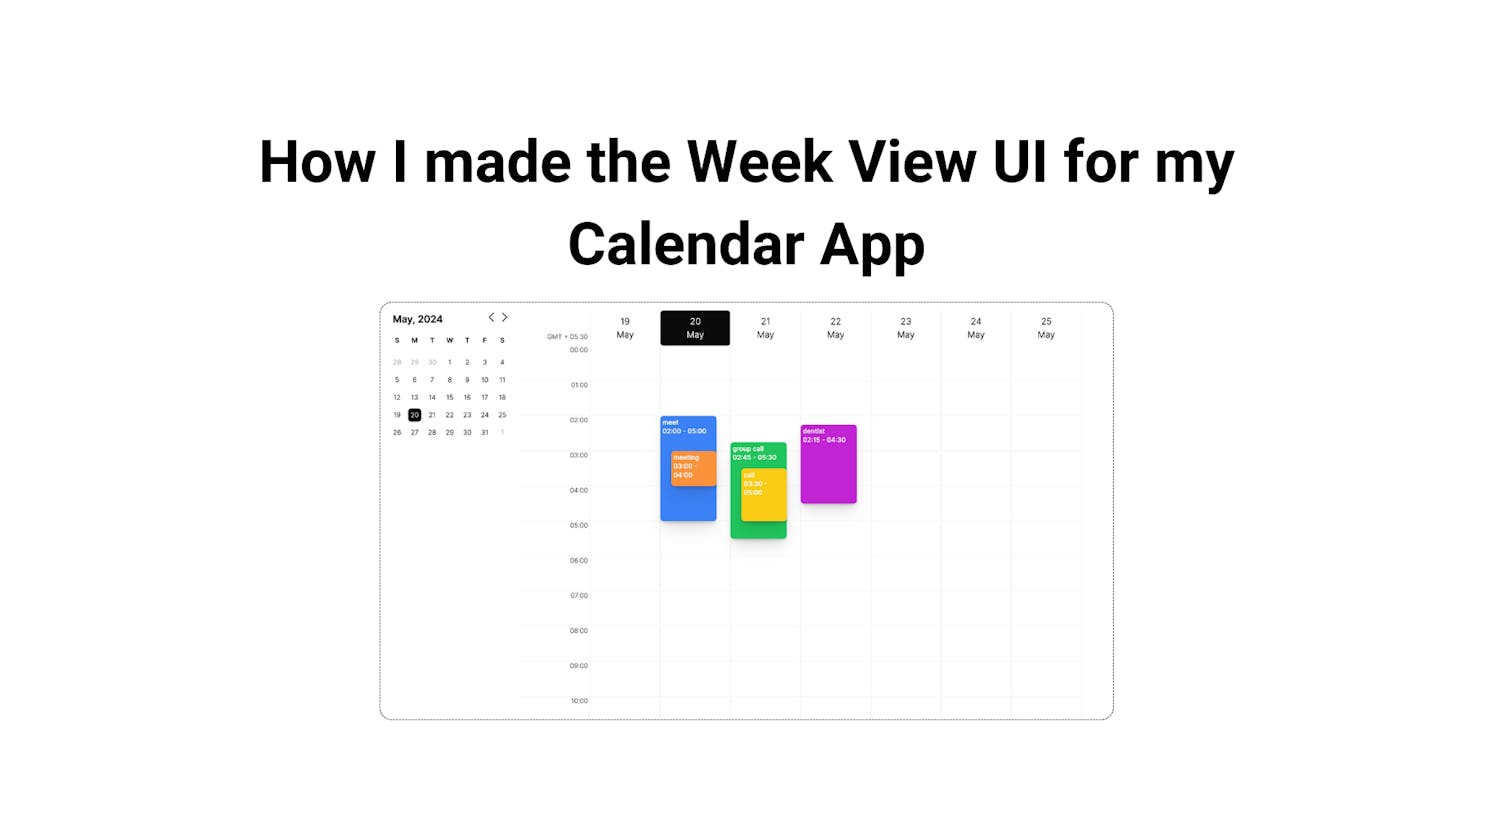 How to Build a Week View UI for Your Calendar App